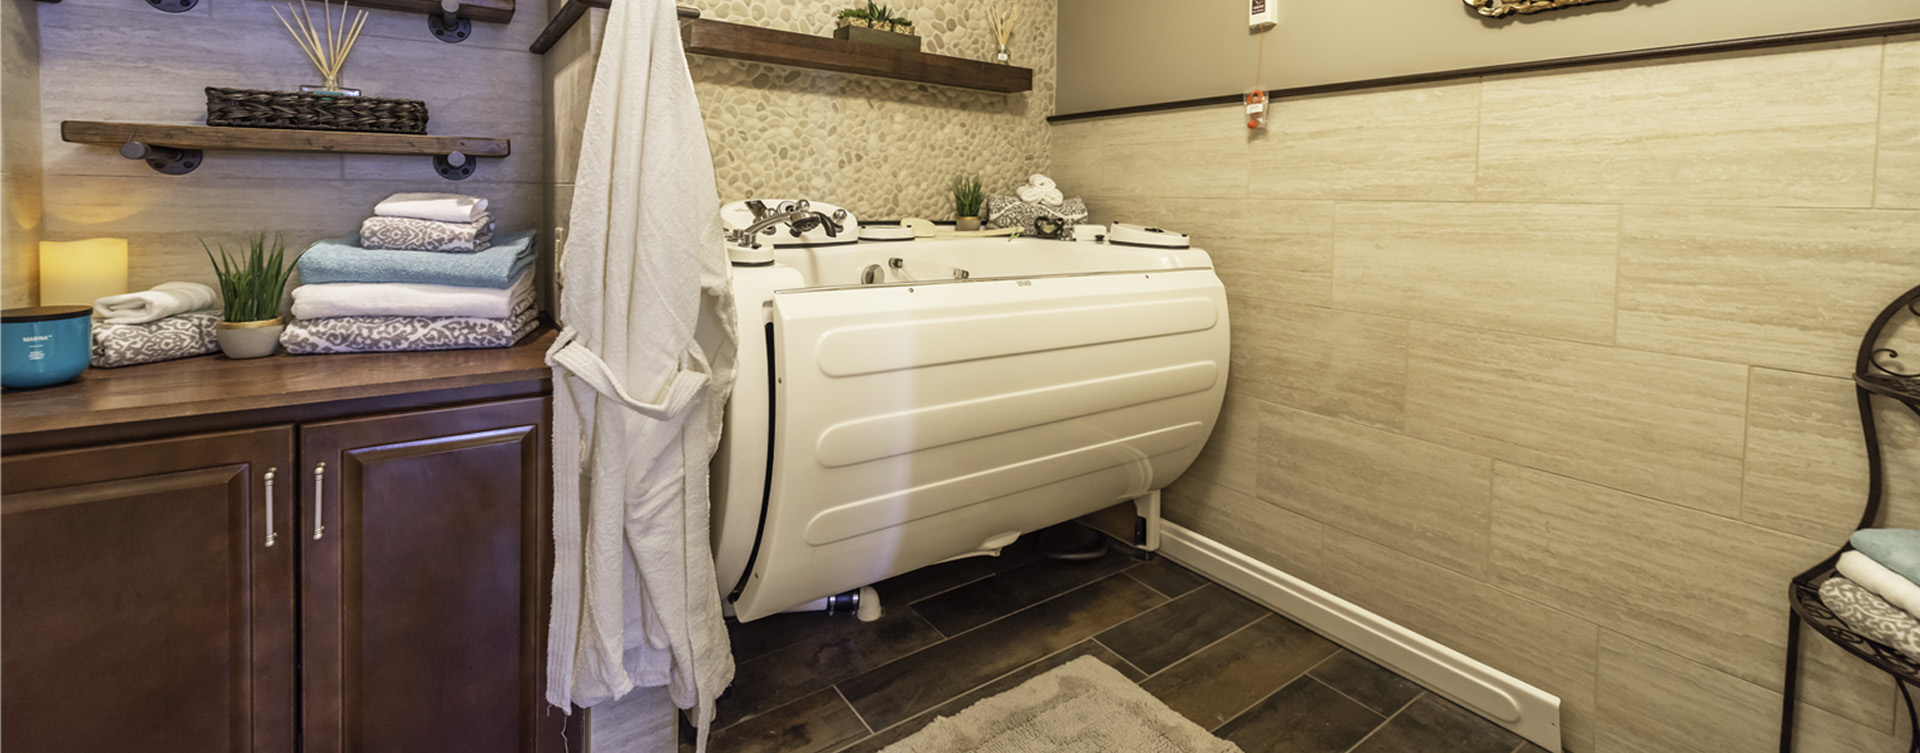 With an easy access design, our whirlpool allows you to enjoy a warm bath safely and comfortably at Bickford of Canton